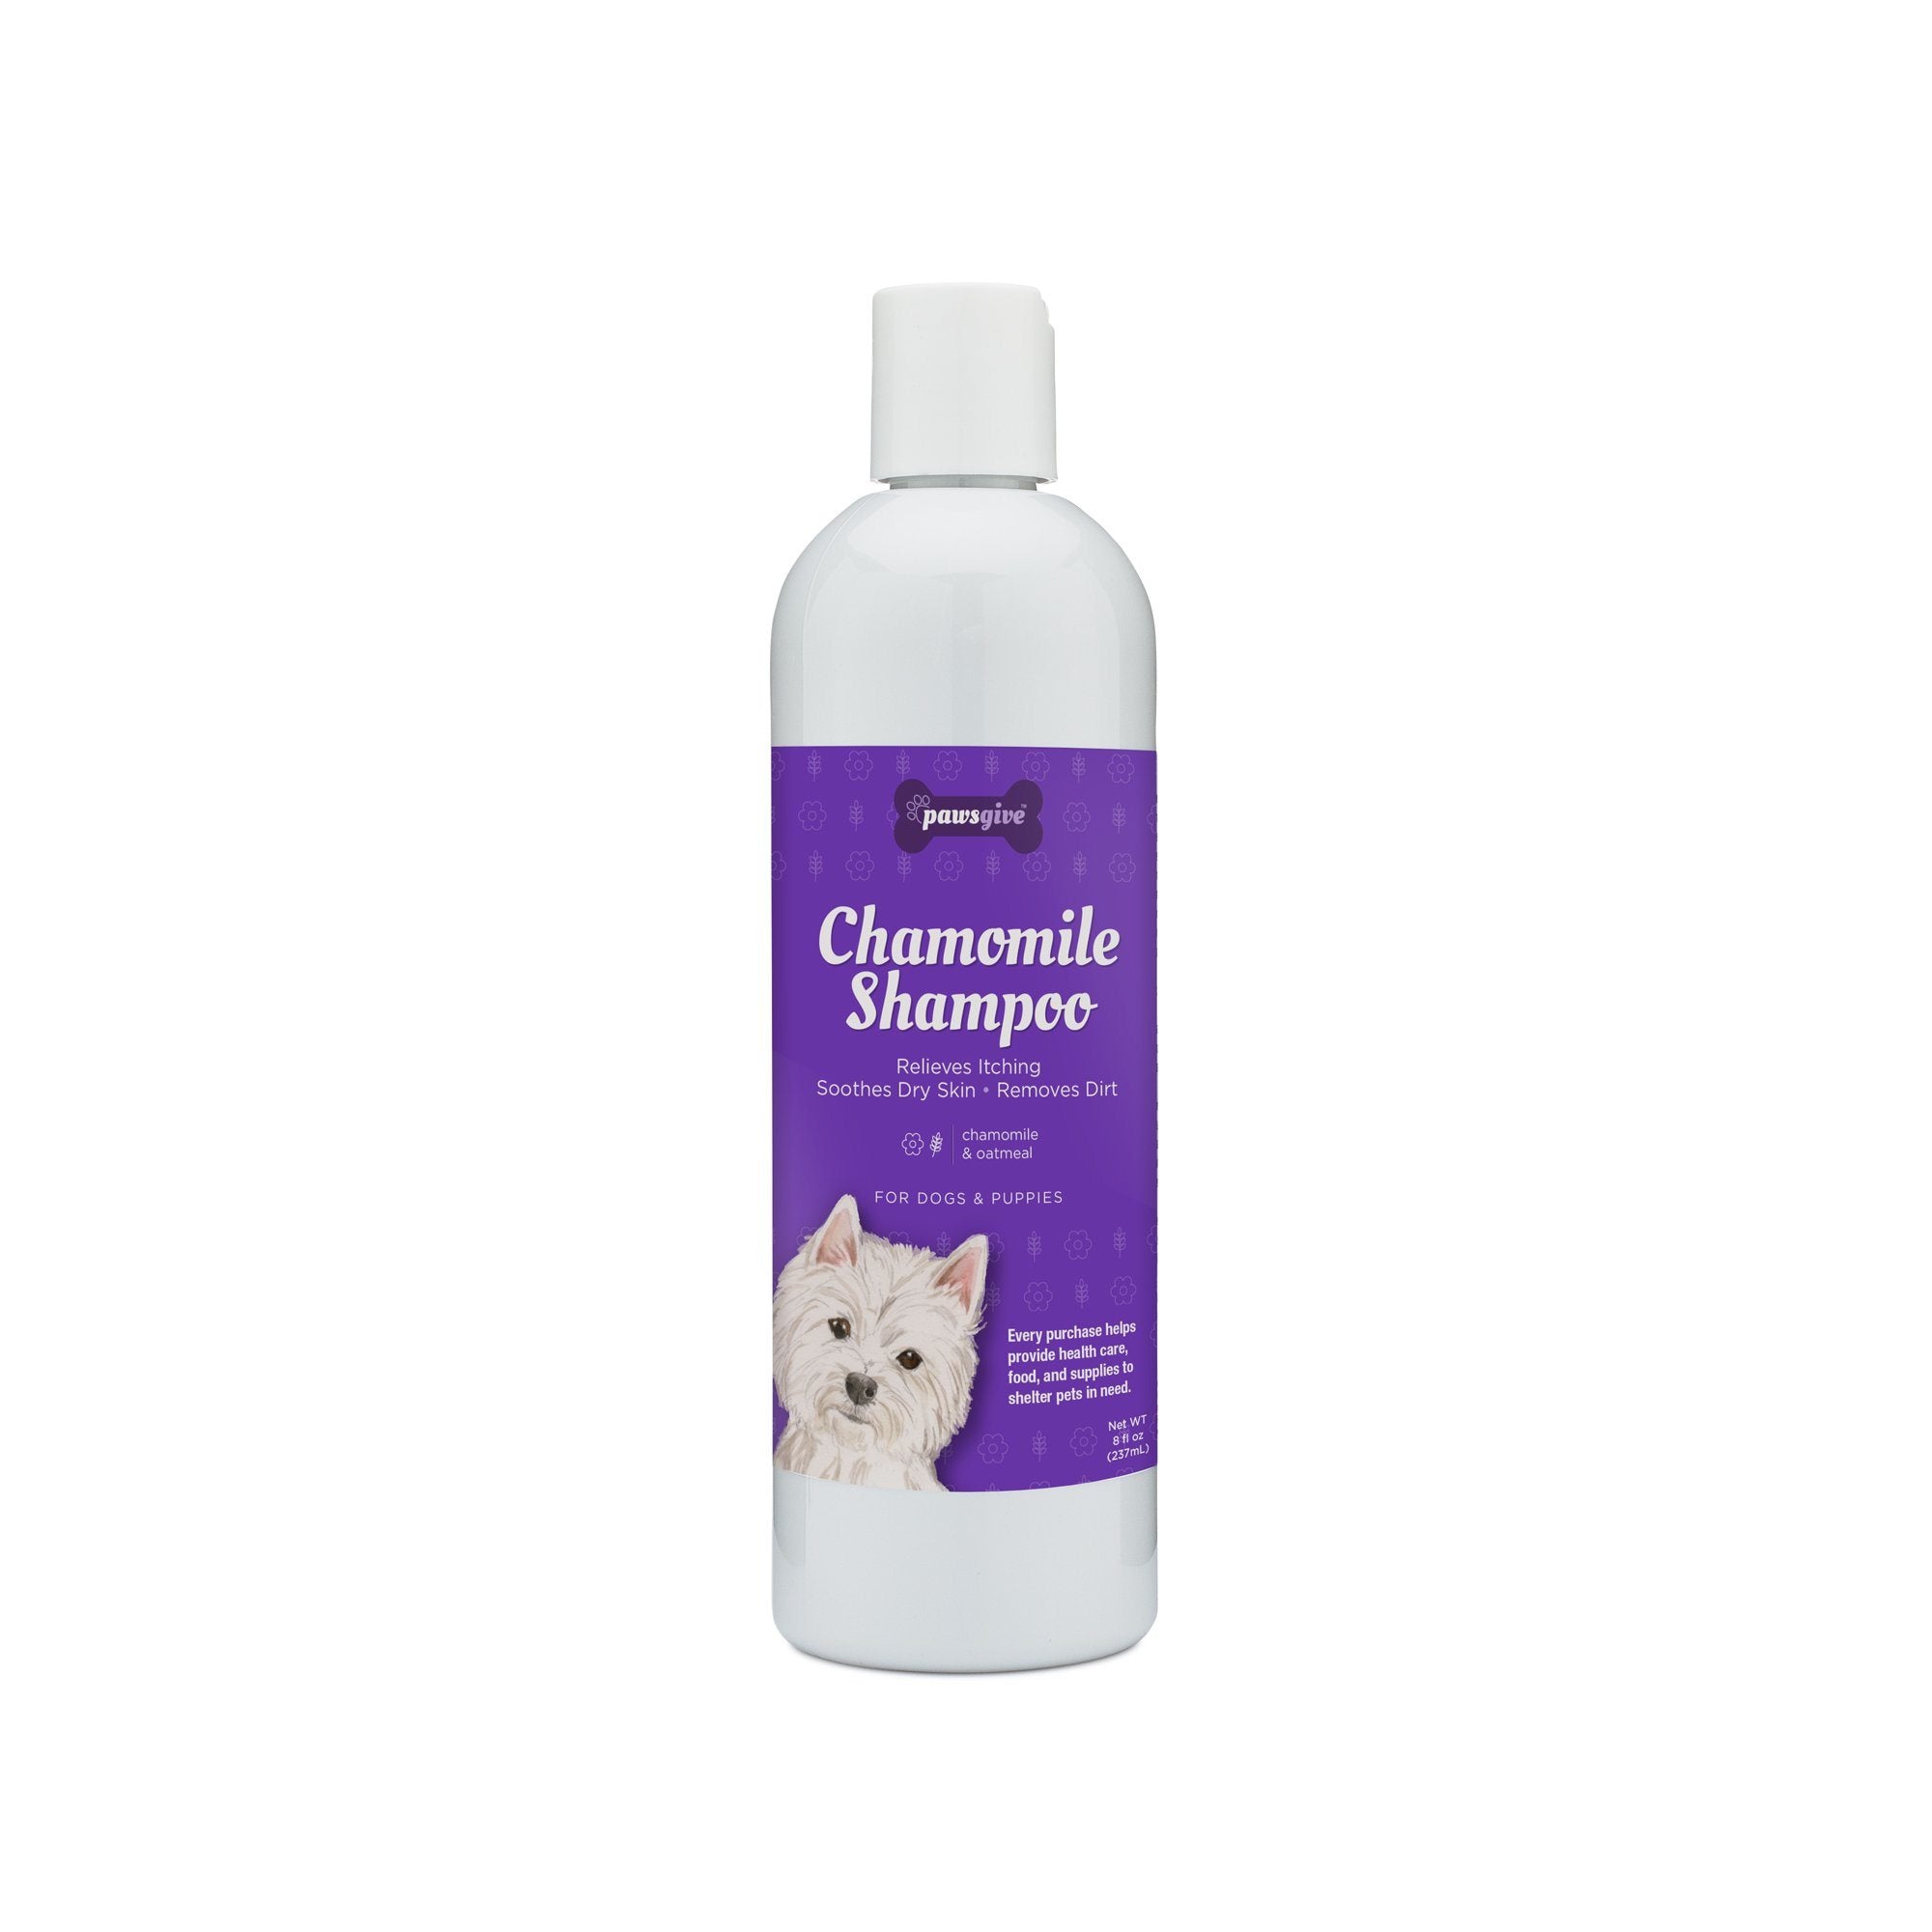 Soothing Dog Shampoo For Itchy Skin, Chamomile & Oatmeal